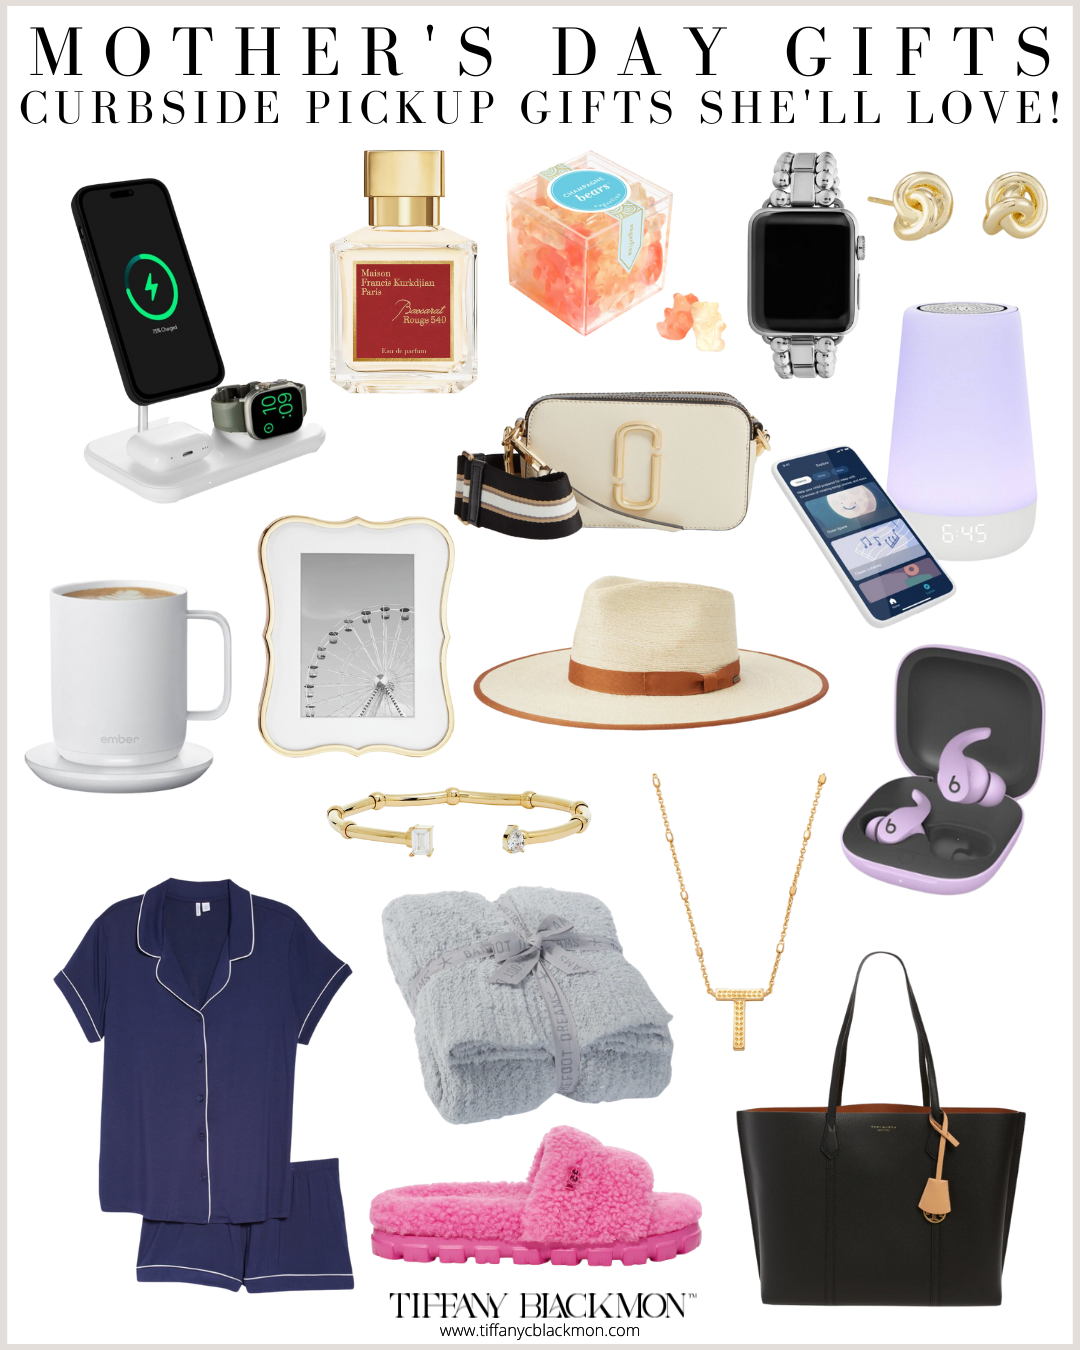 Mother's Day Gift Guide: Quick Shipping
#giftsforher #giftsformom #giftguides #mothersday #quickshipping #curbsidepickup 